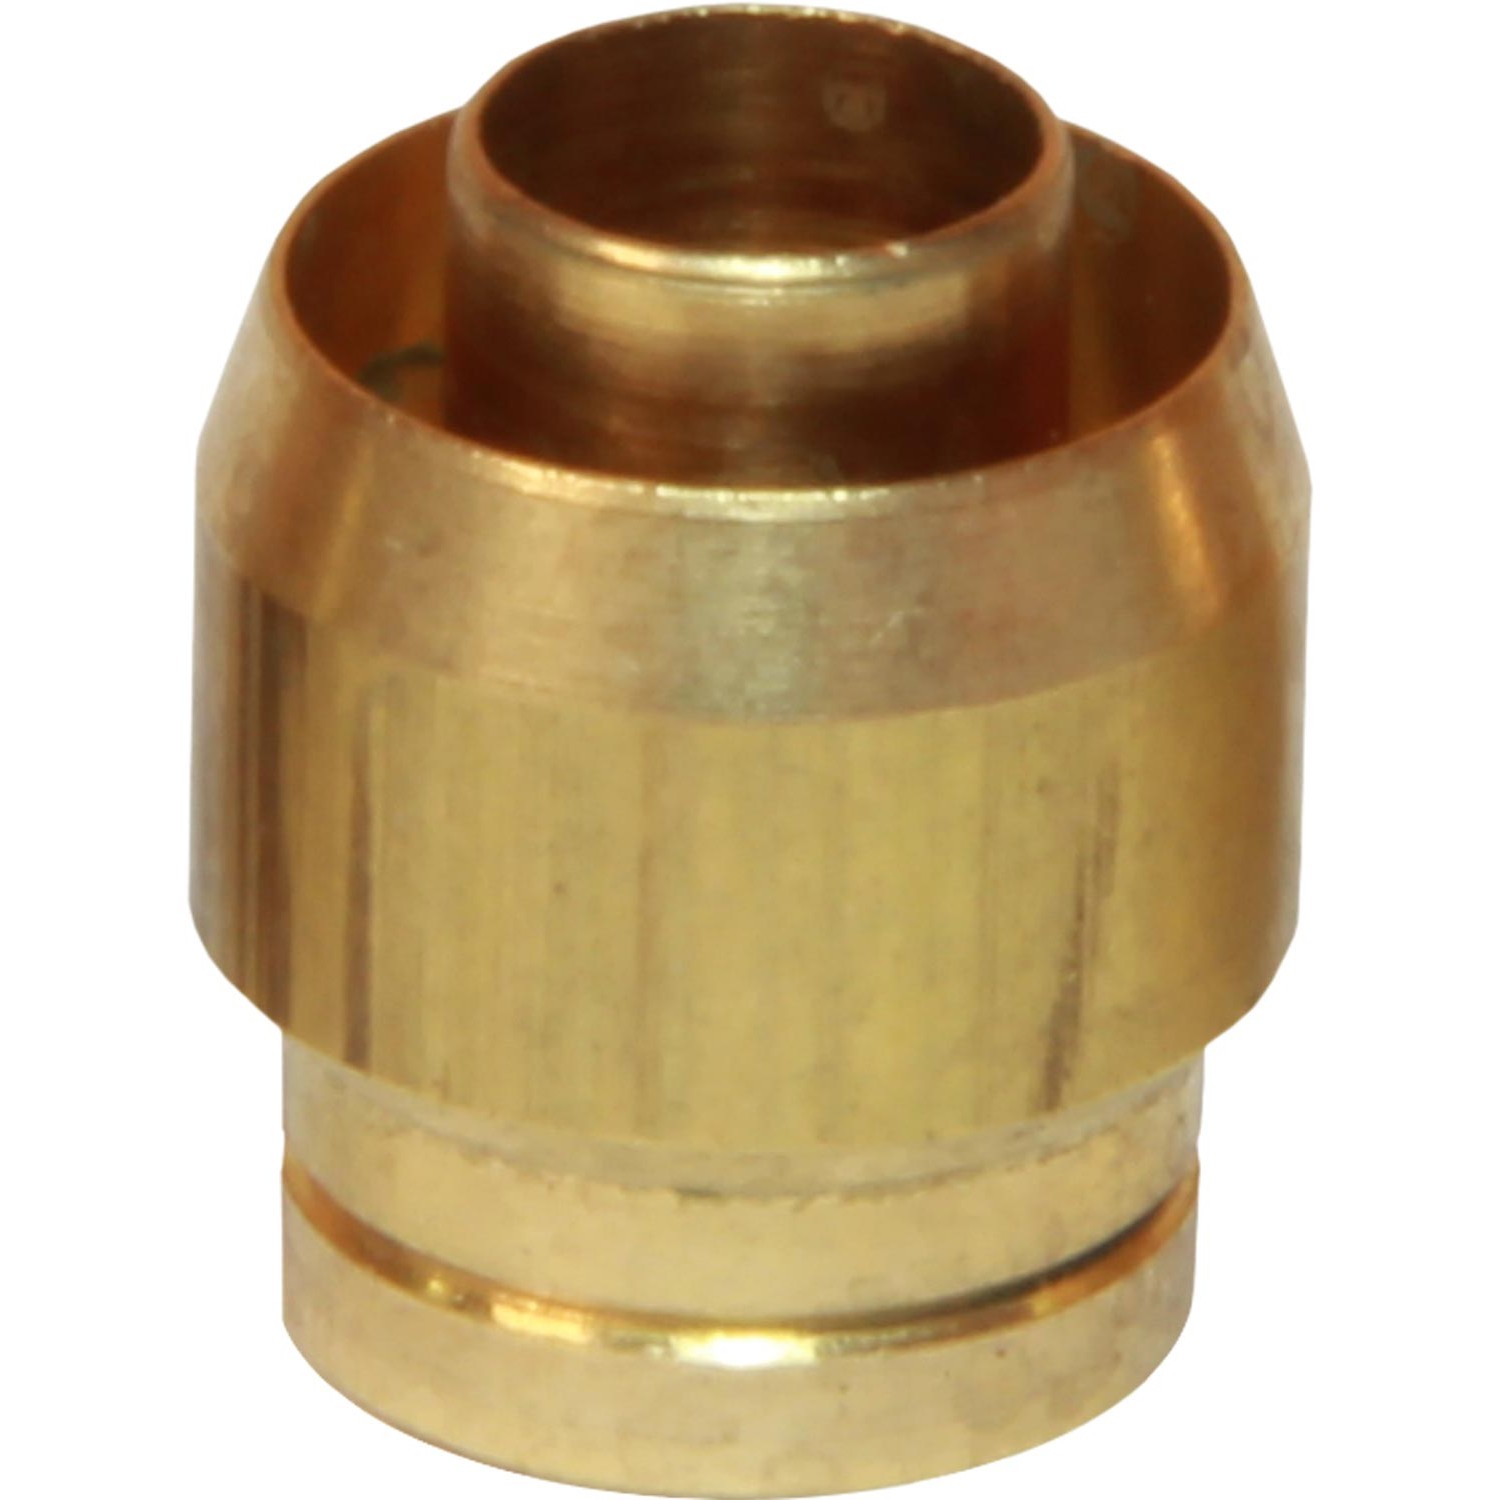 10 x 9mm Brass Olive Barrel Plumbing Olives Compression Fitting Copper Pipe Gas 